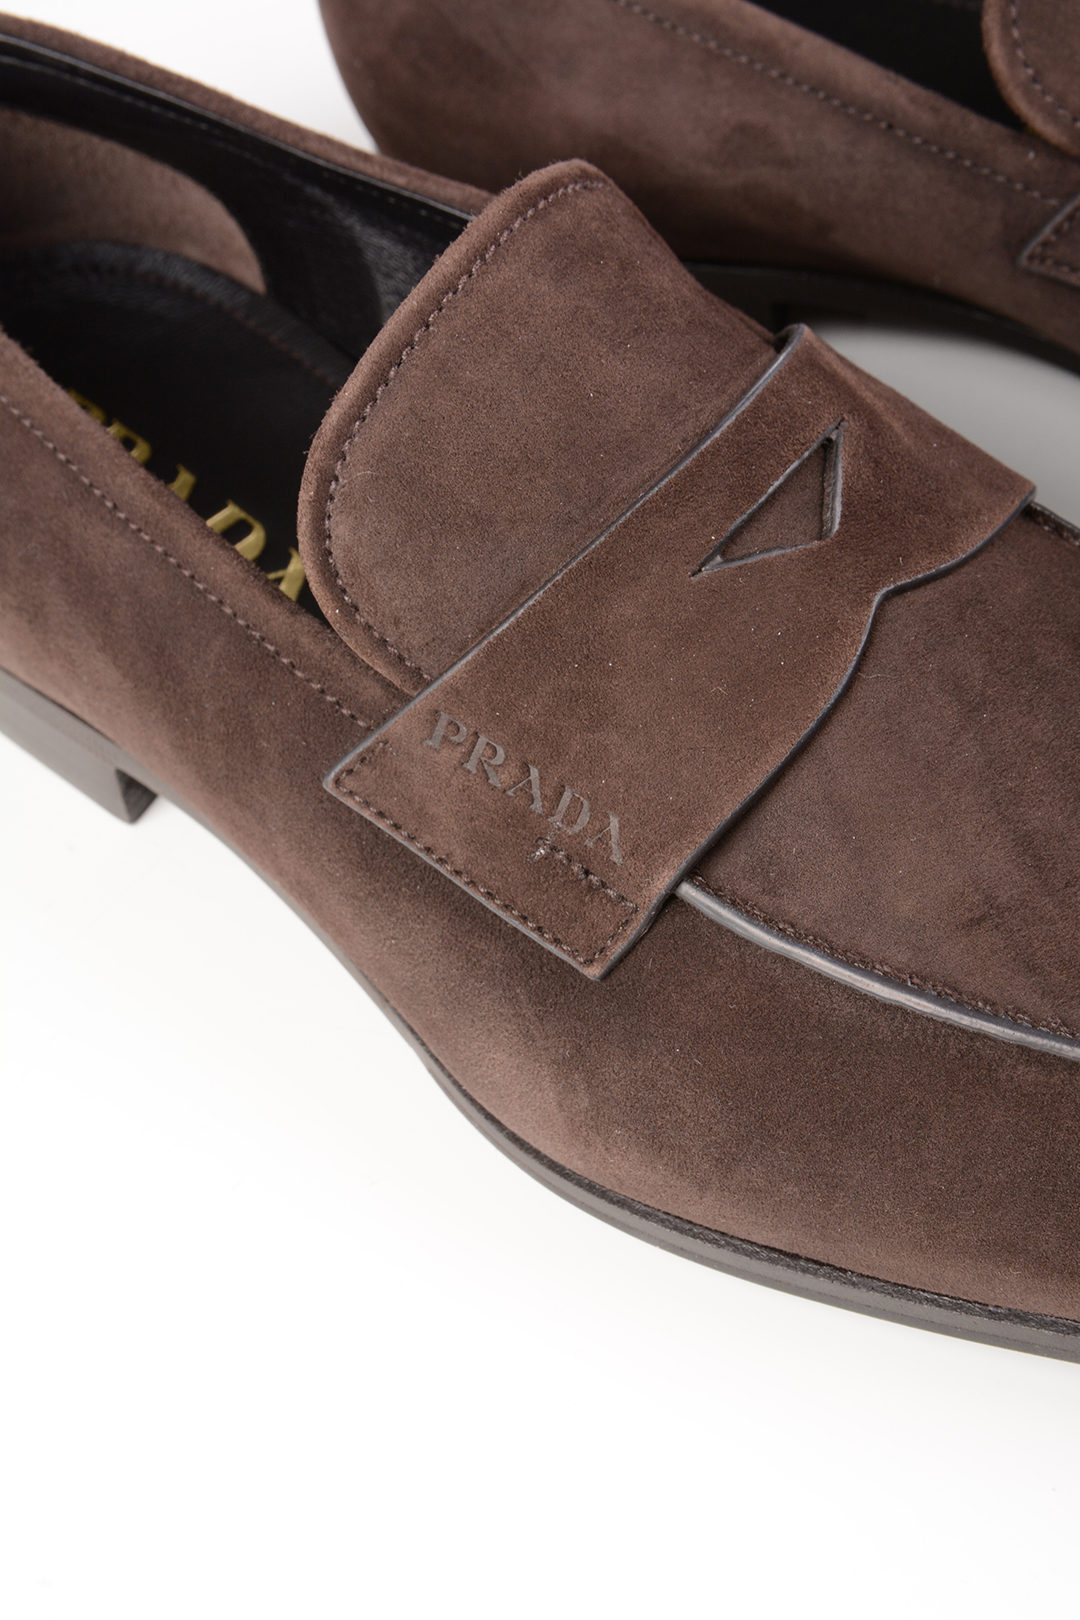 Prada Suede Penny Loafers men - Glamood Outlet